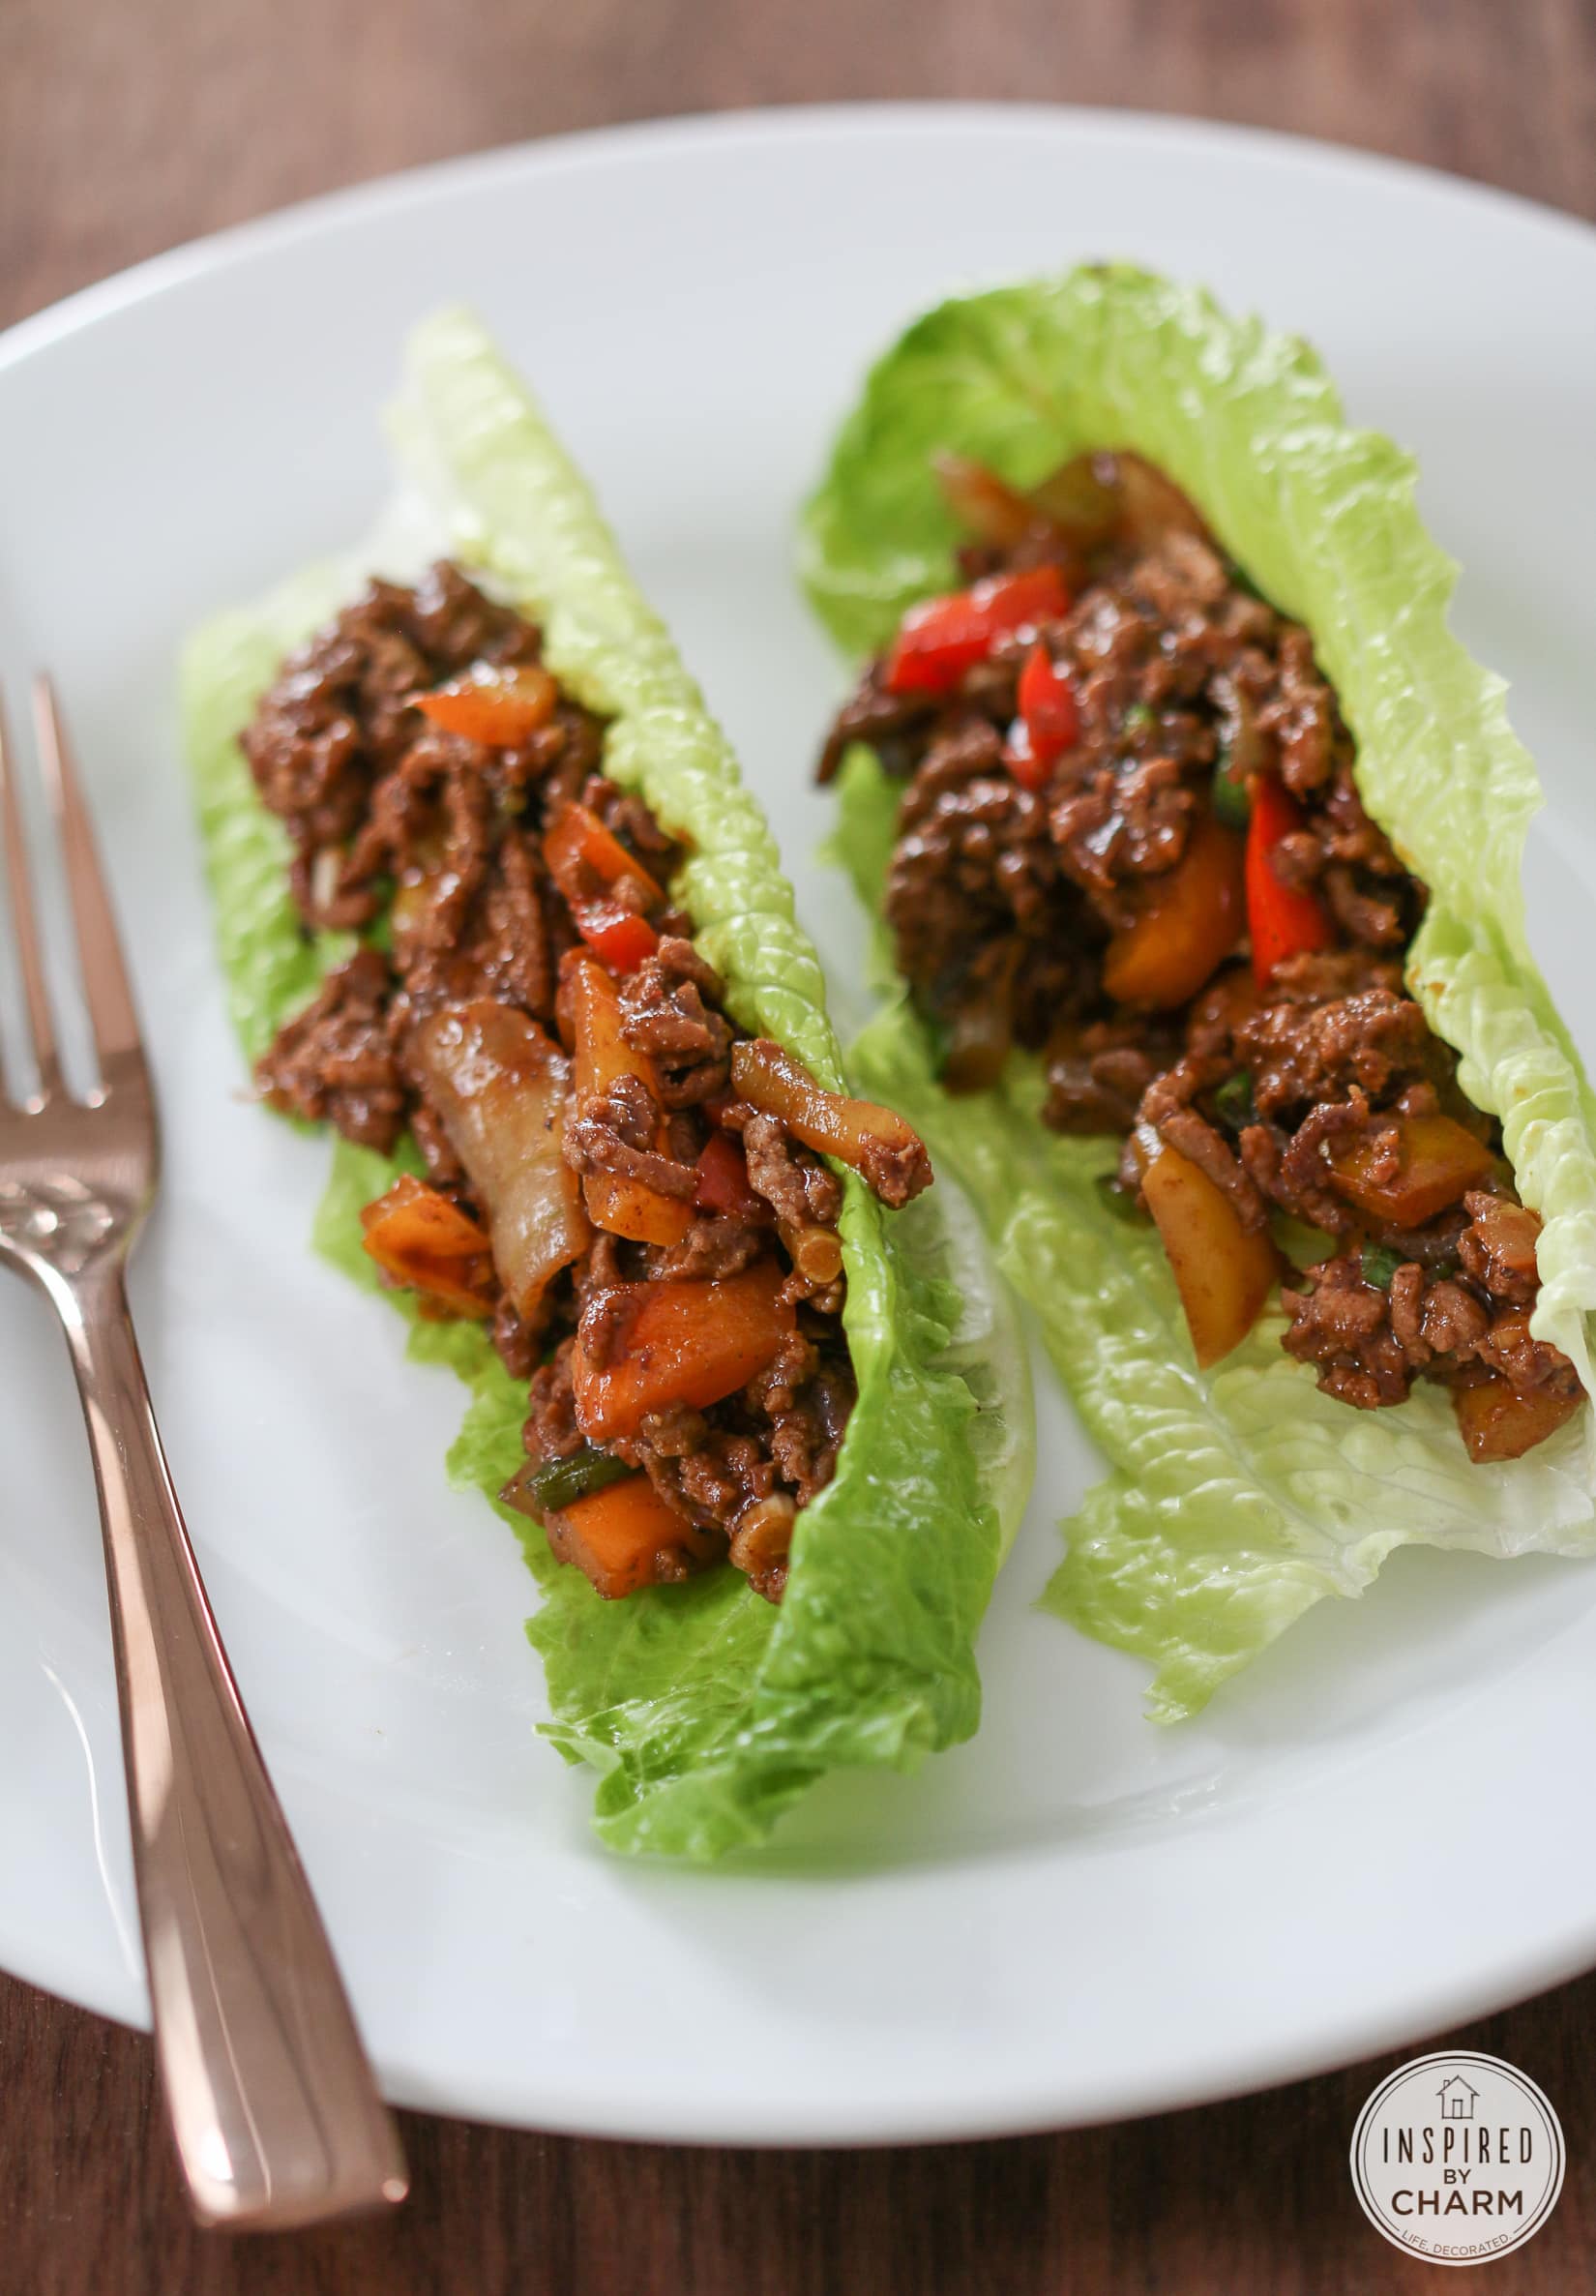 Chili Beef Wraps - Inspired by Charm